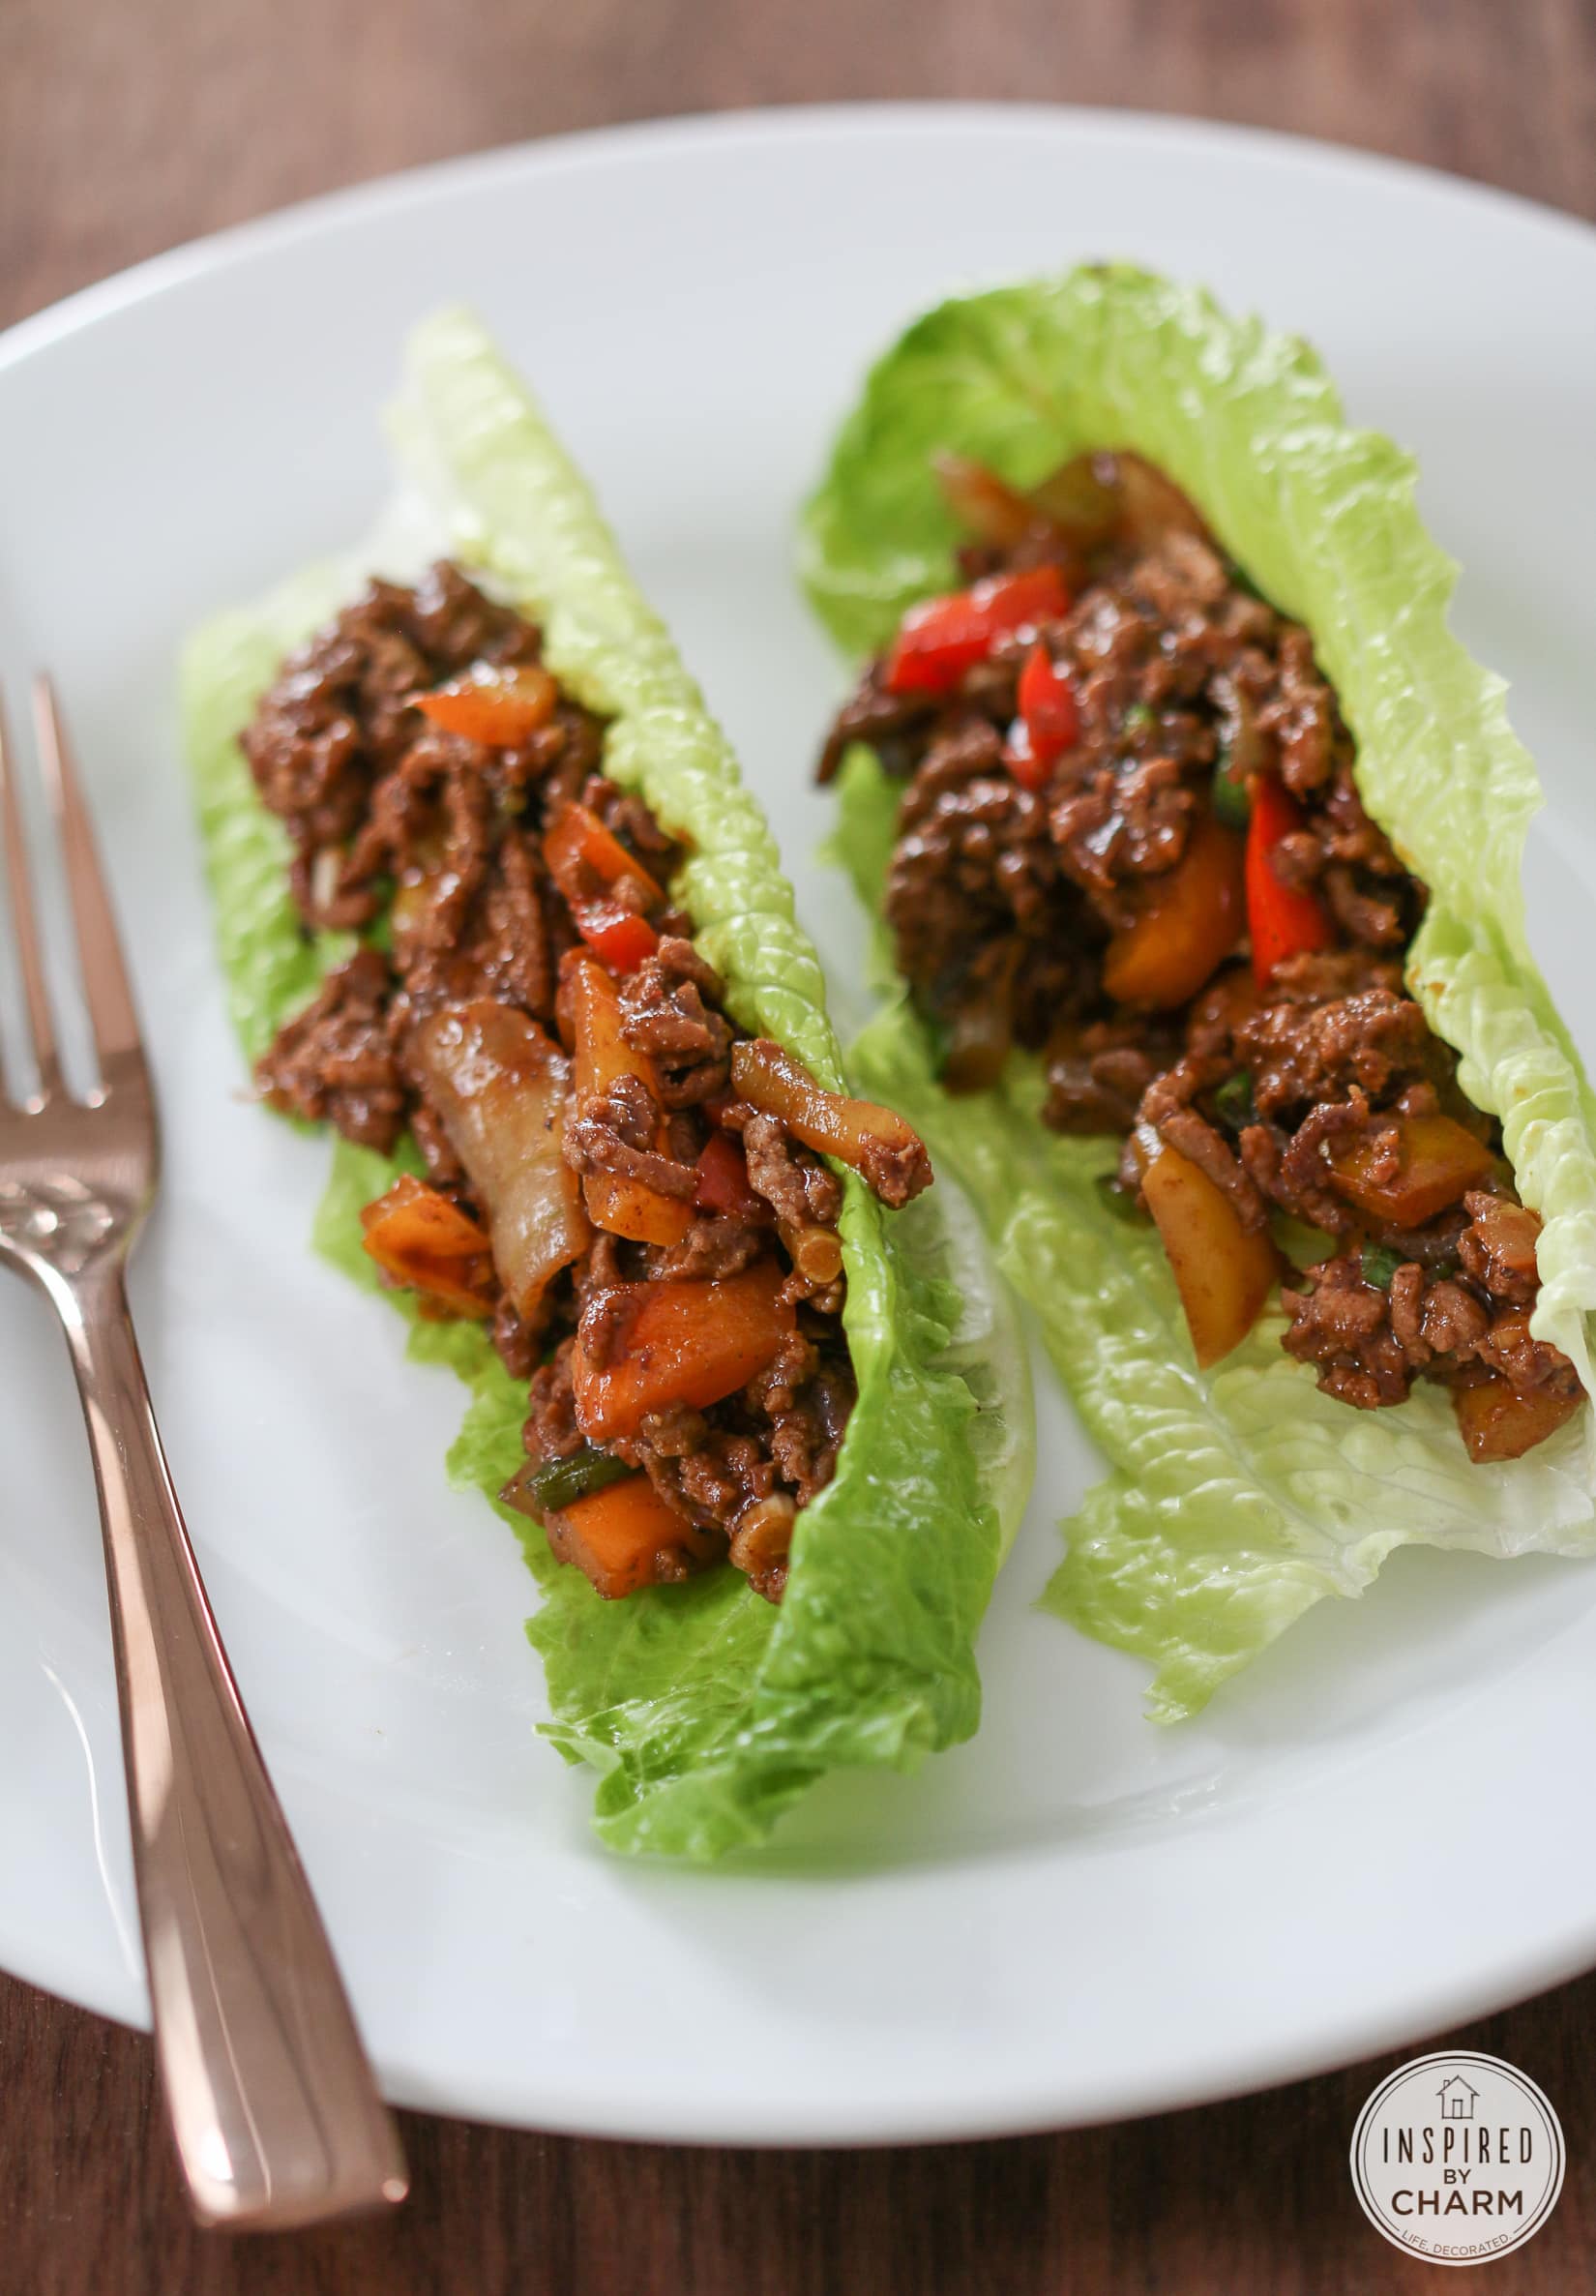 Chili Beef Wraps - Inspired by Charm